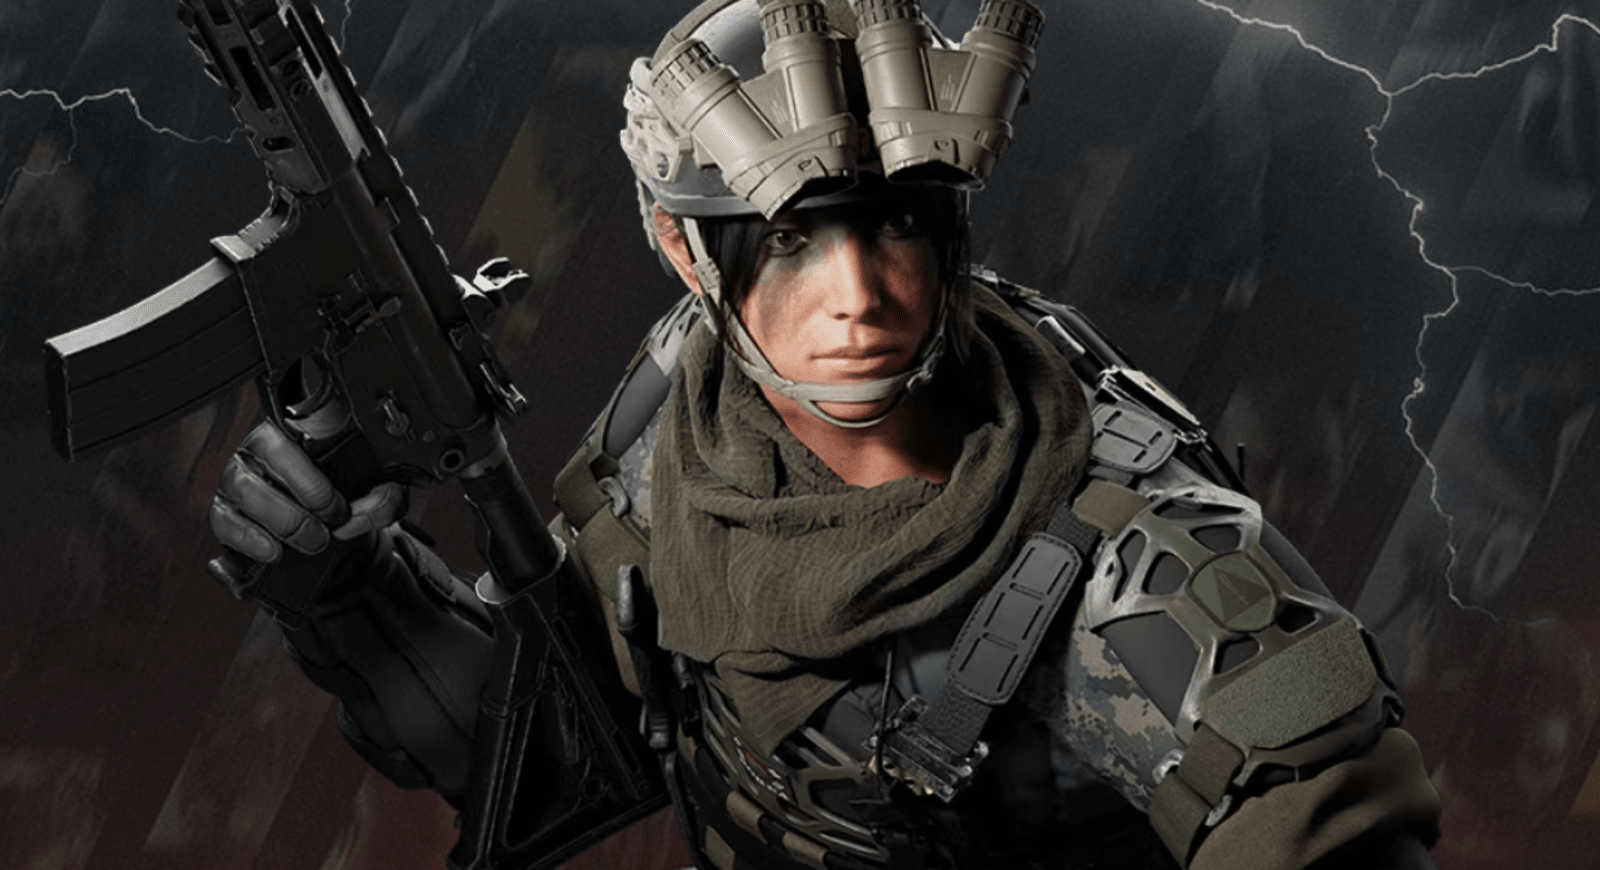 U: Xbox issue fixed] Rainbow Six Siege crossplay issue on Stadia confirmed